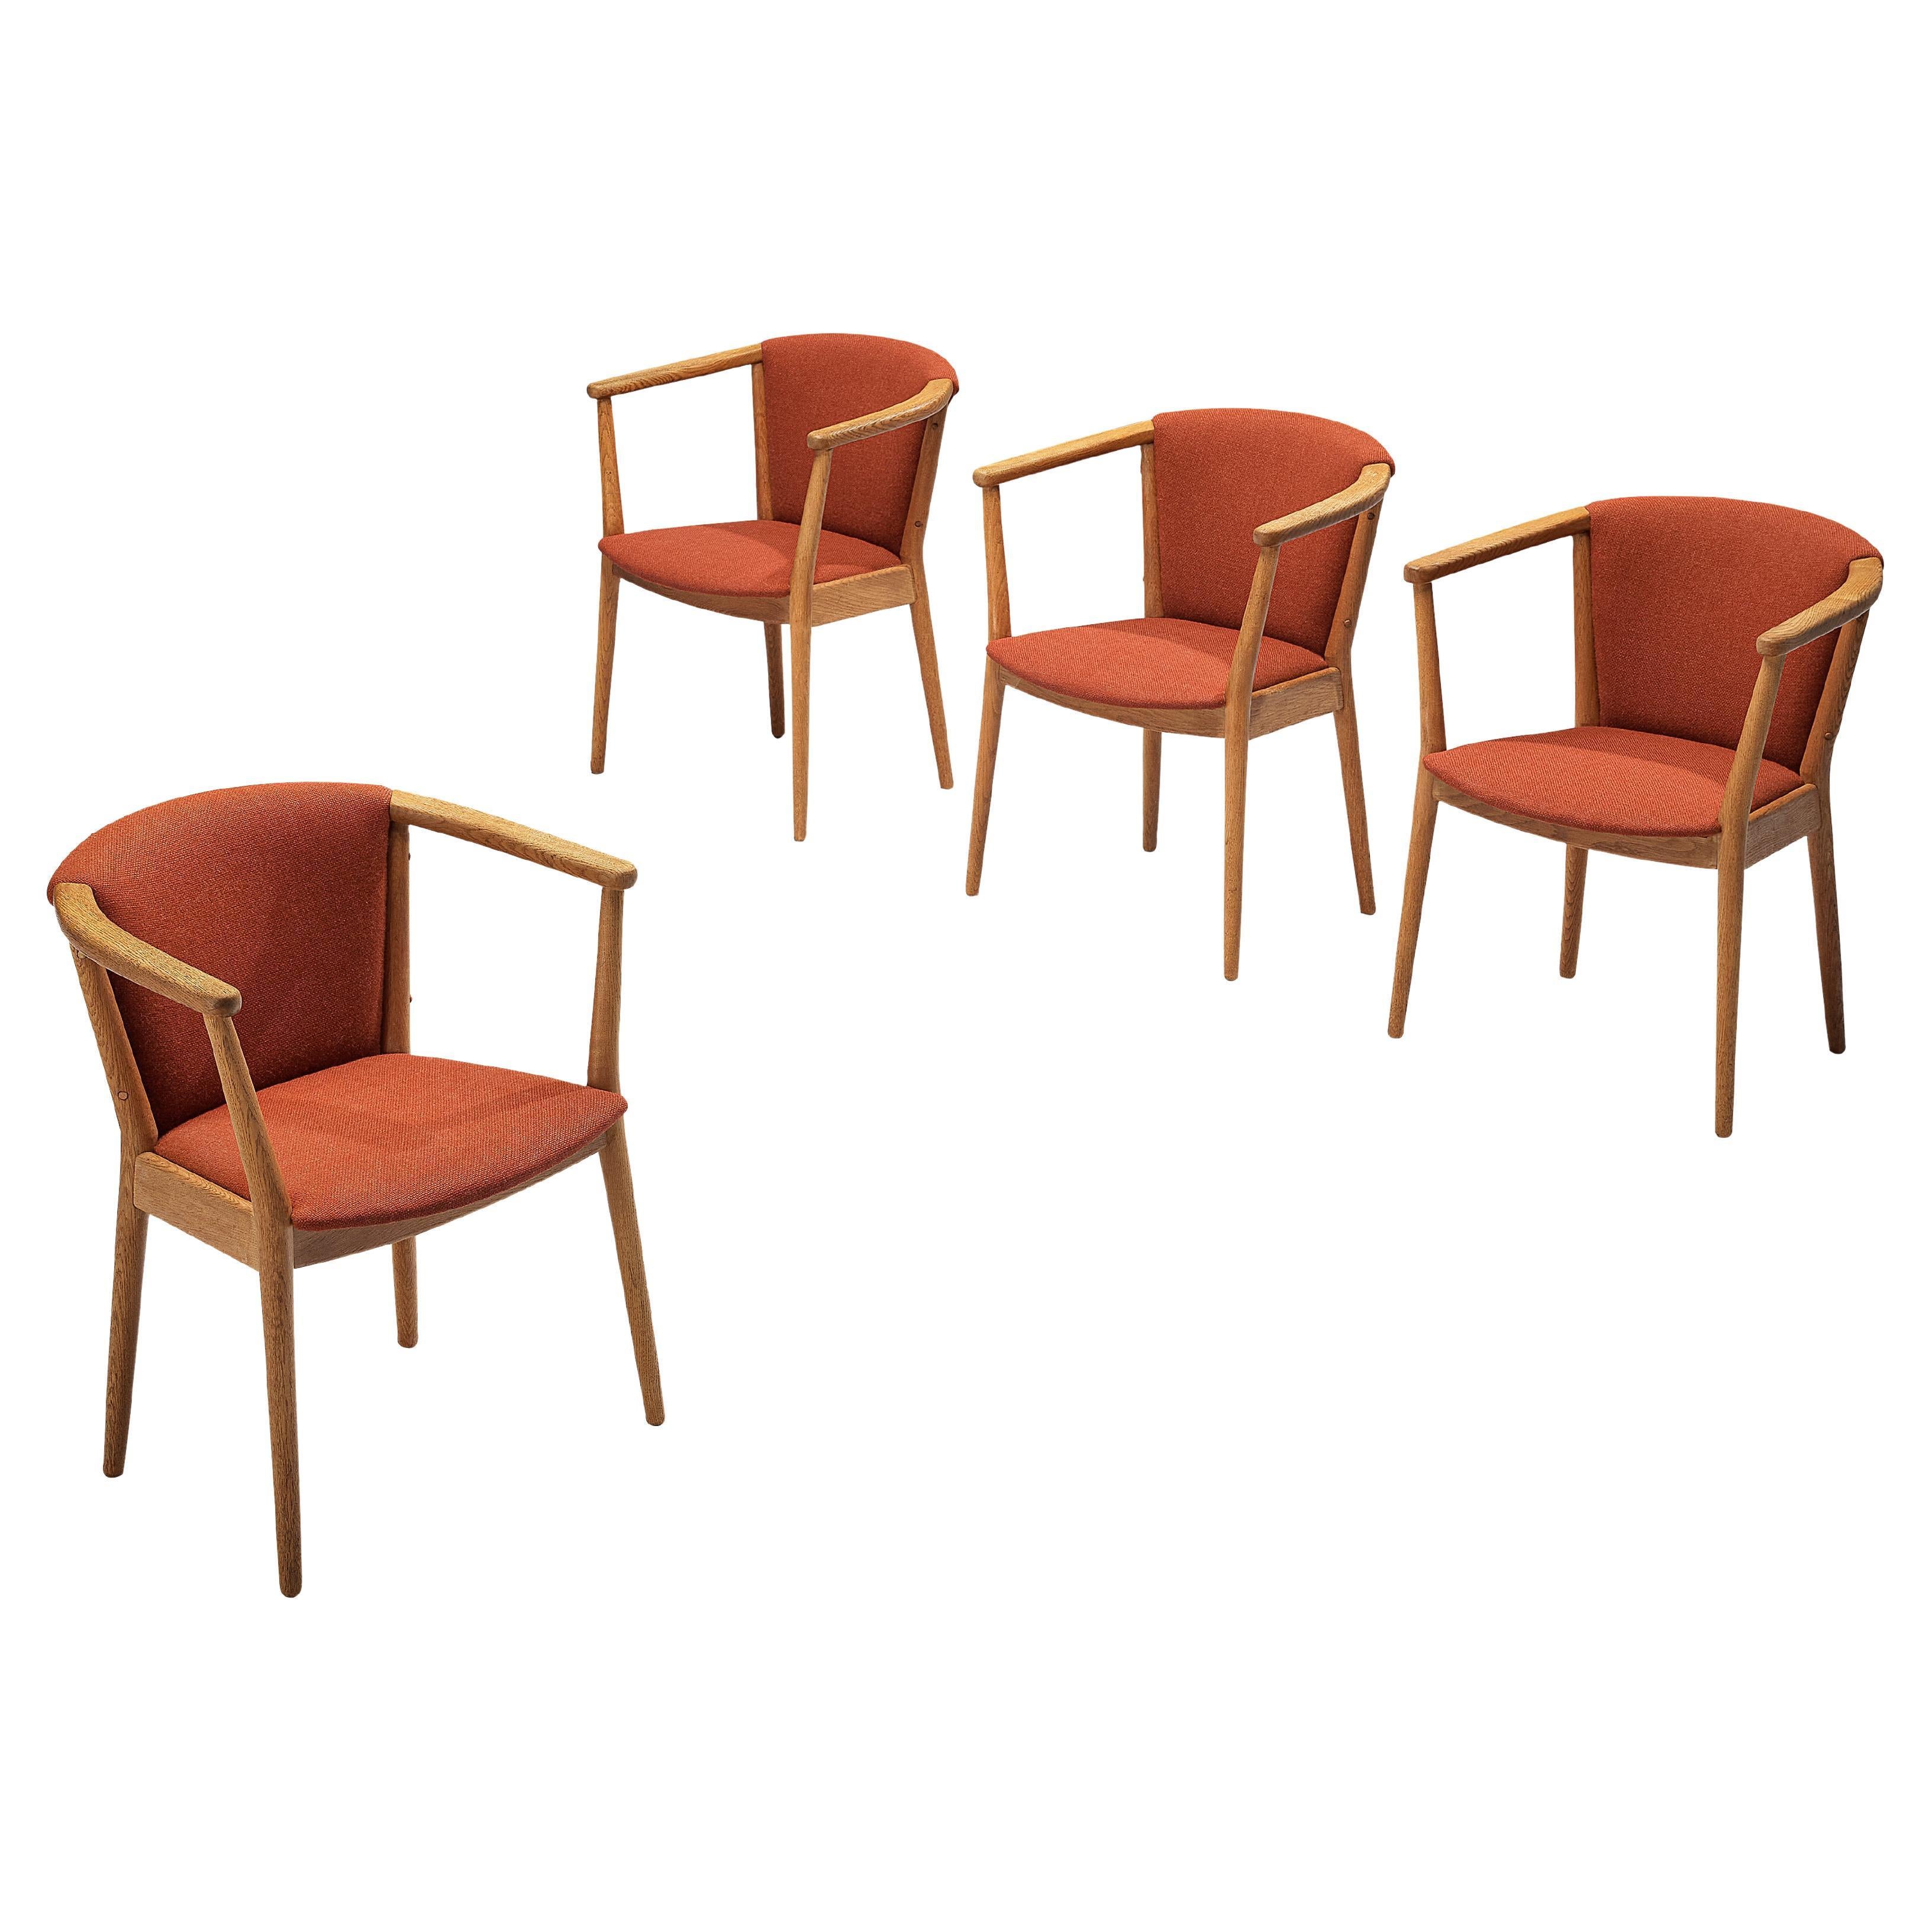 Nanna Ditzel Dining Chairs in Oak and Red Fabric